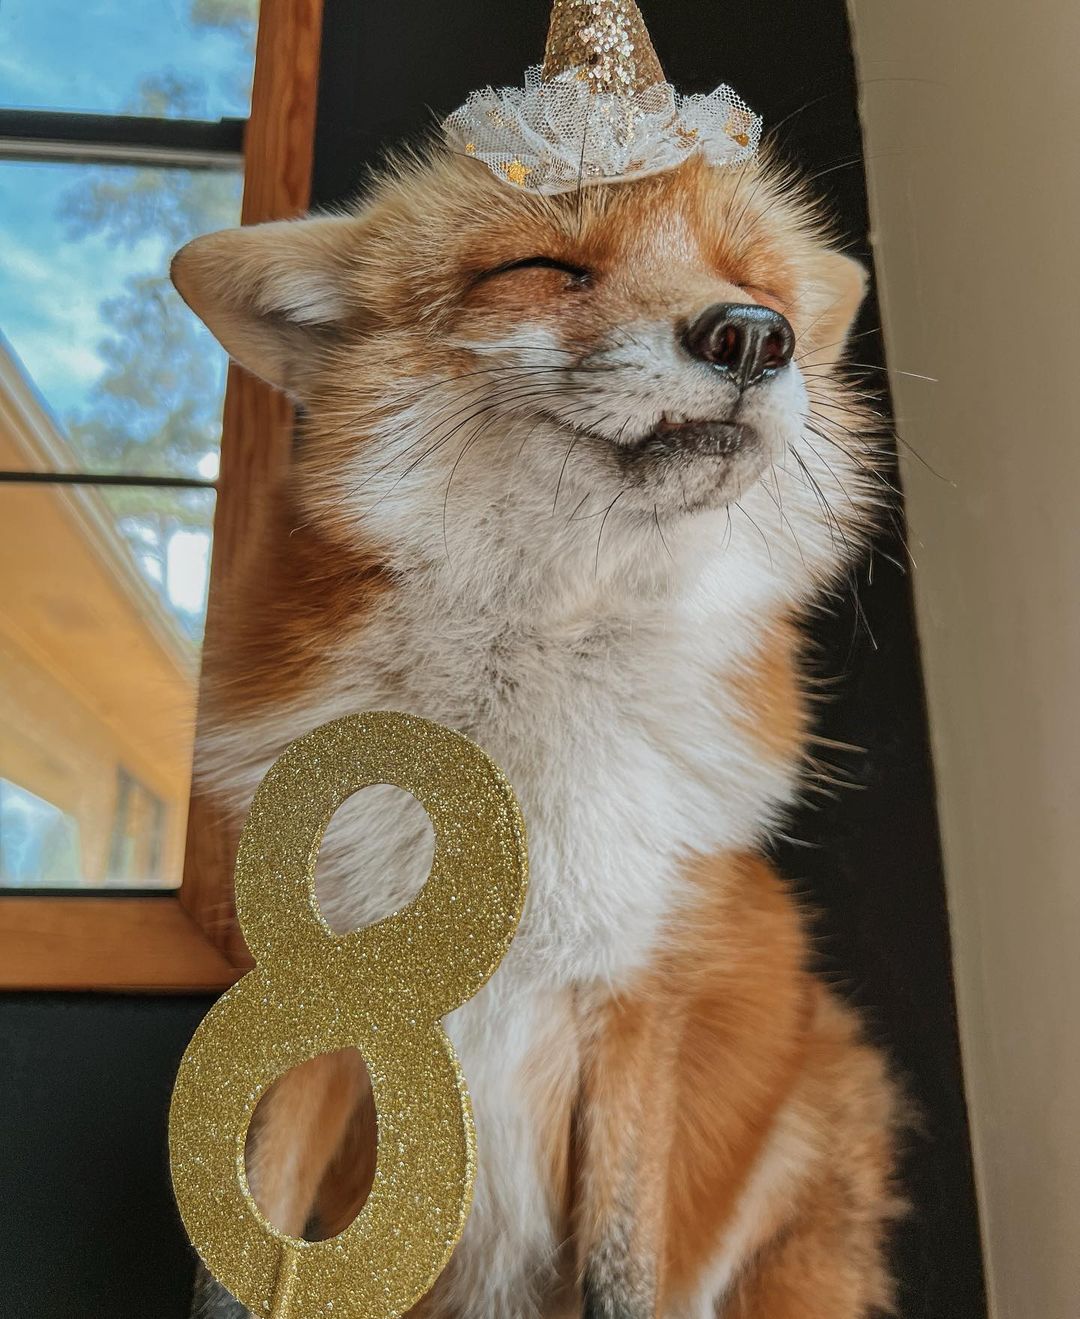 Juniper recently turned eight years old on Sunday April 2nd and was thrown a party with a signature cake (Instagram @juniperfoxx)